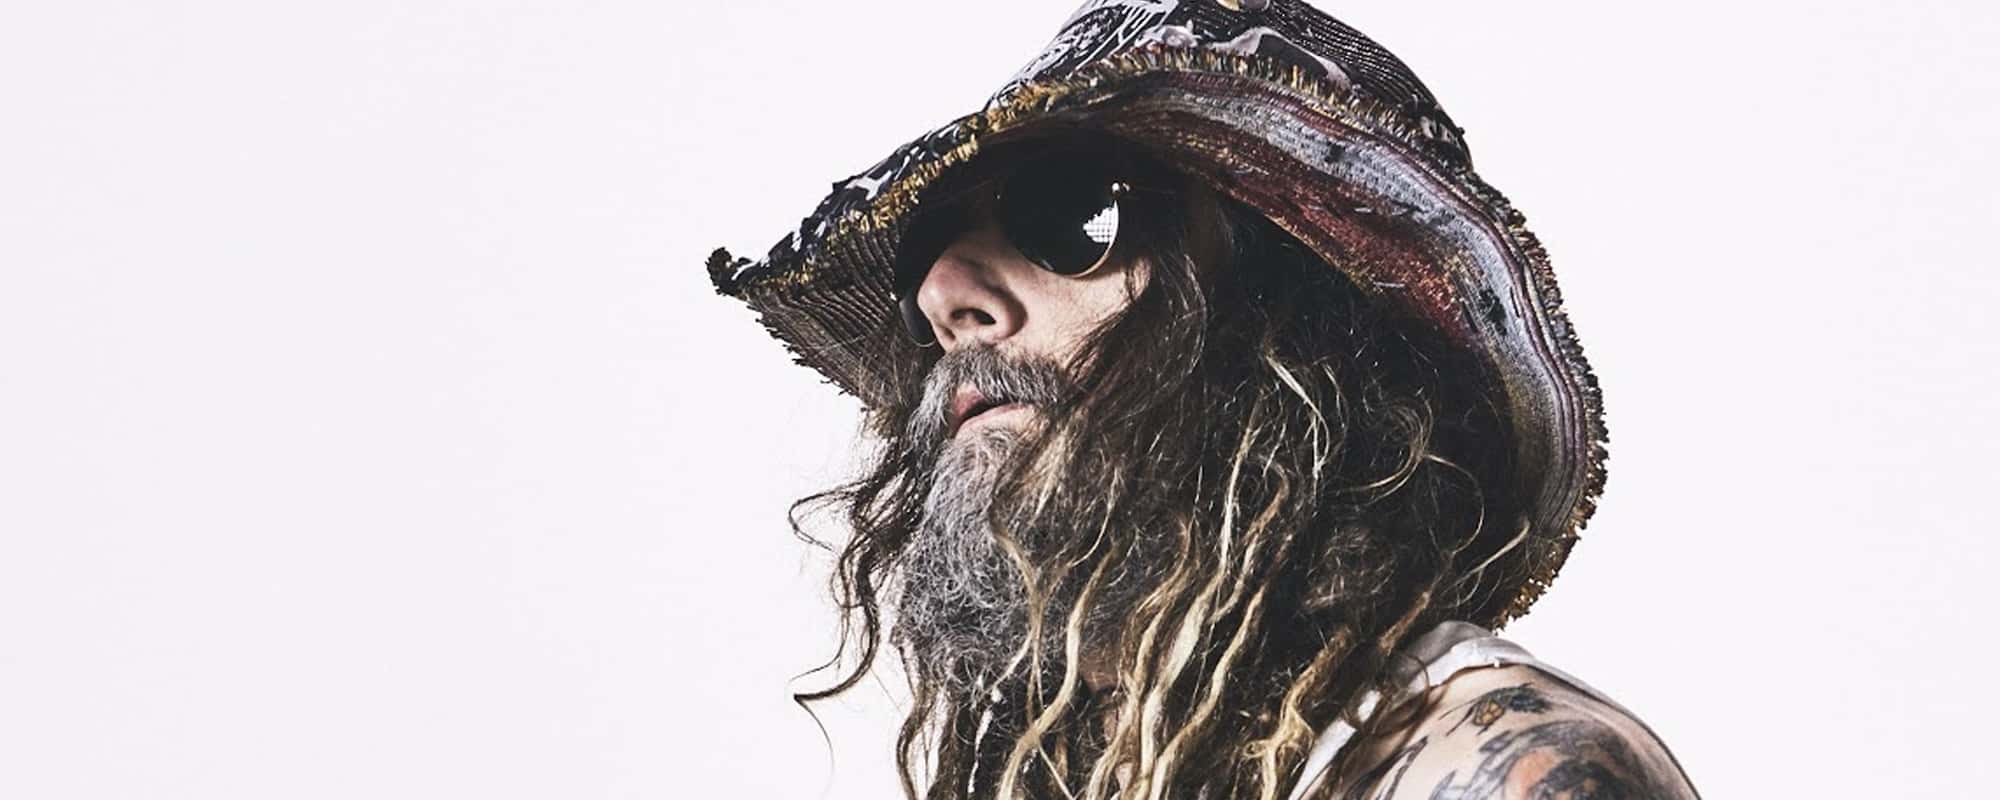 The Meaning Behind the Undead Band Name Rob Zombie